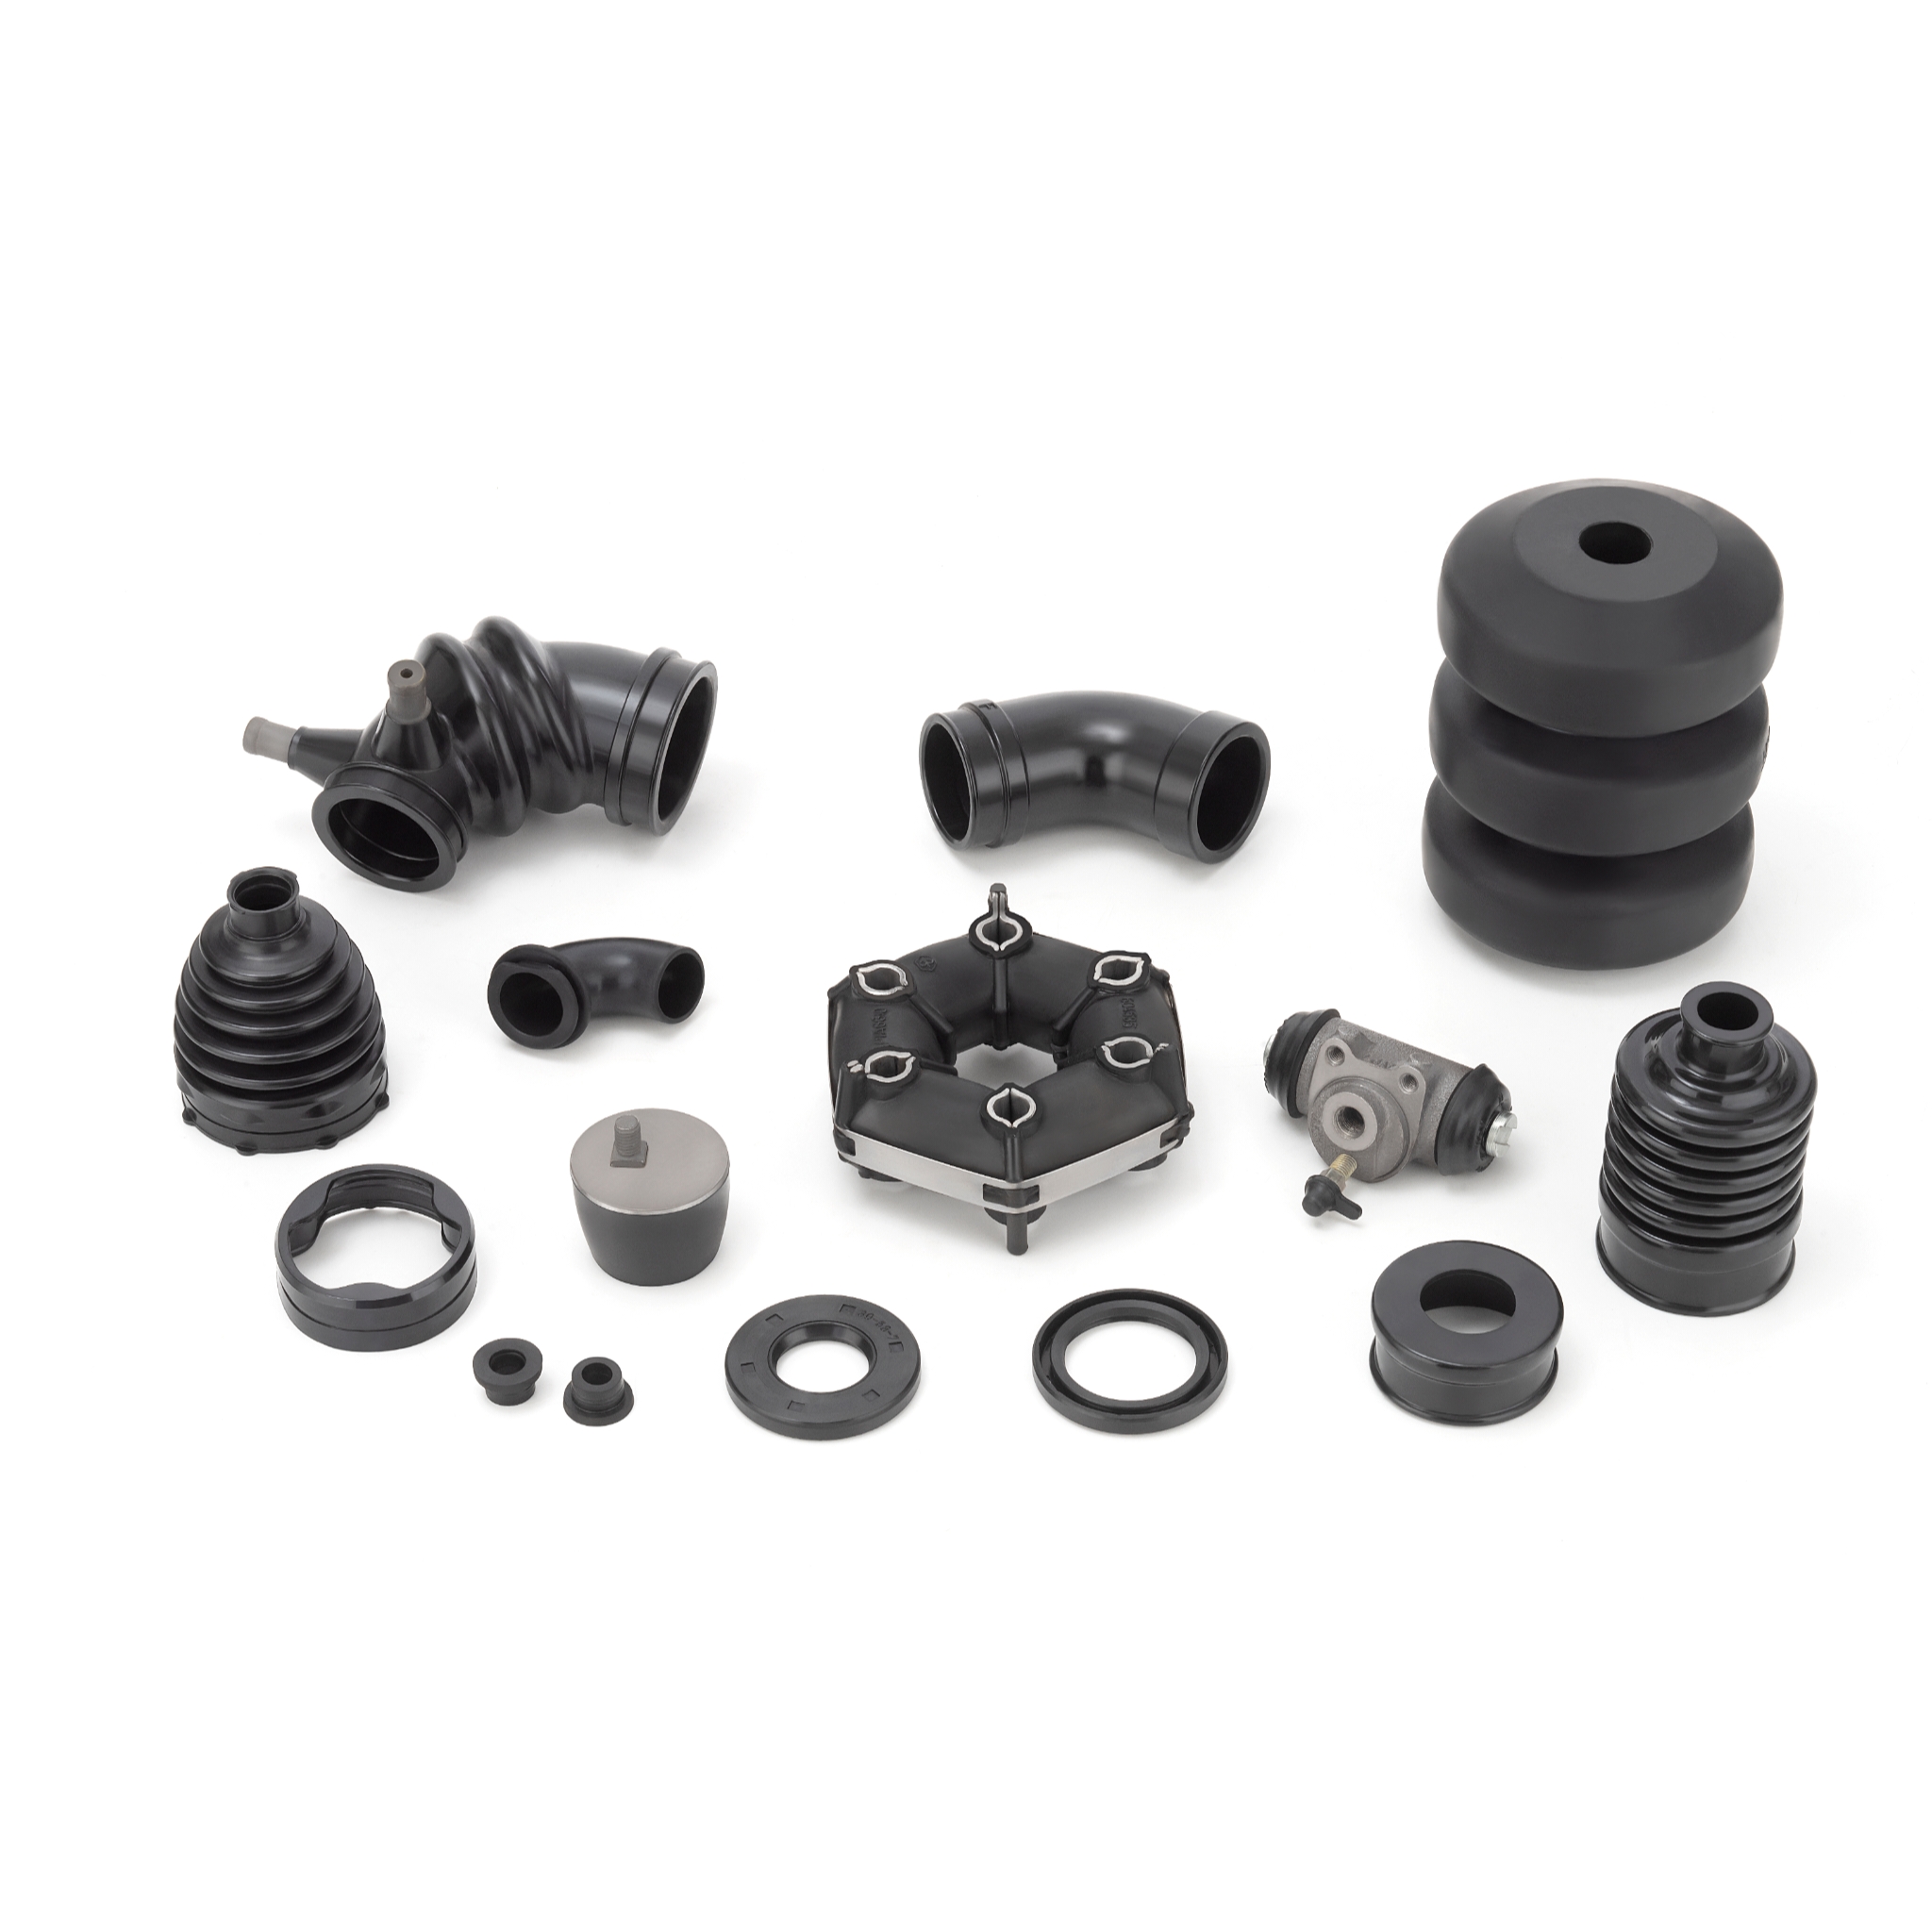 rubber and plastic components